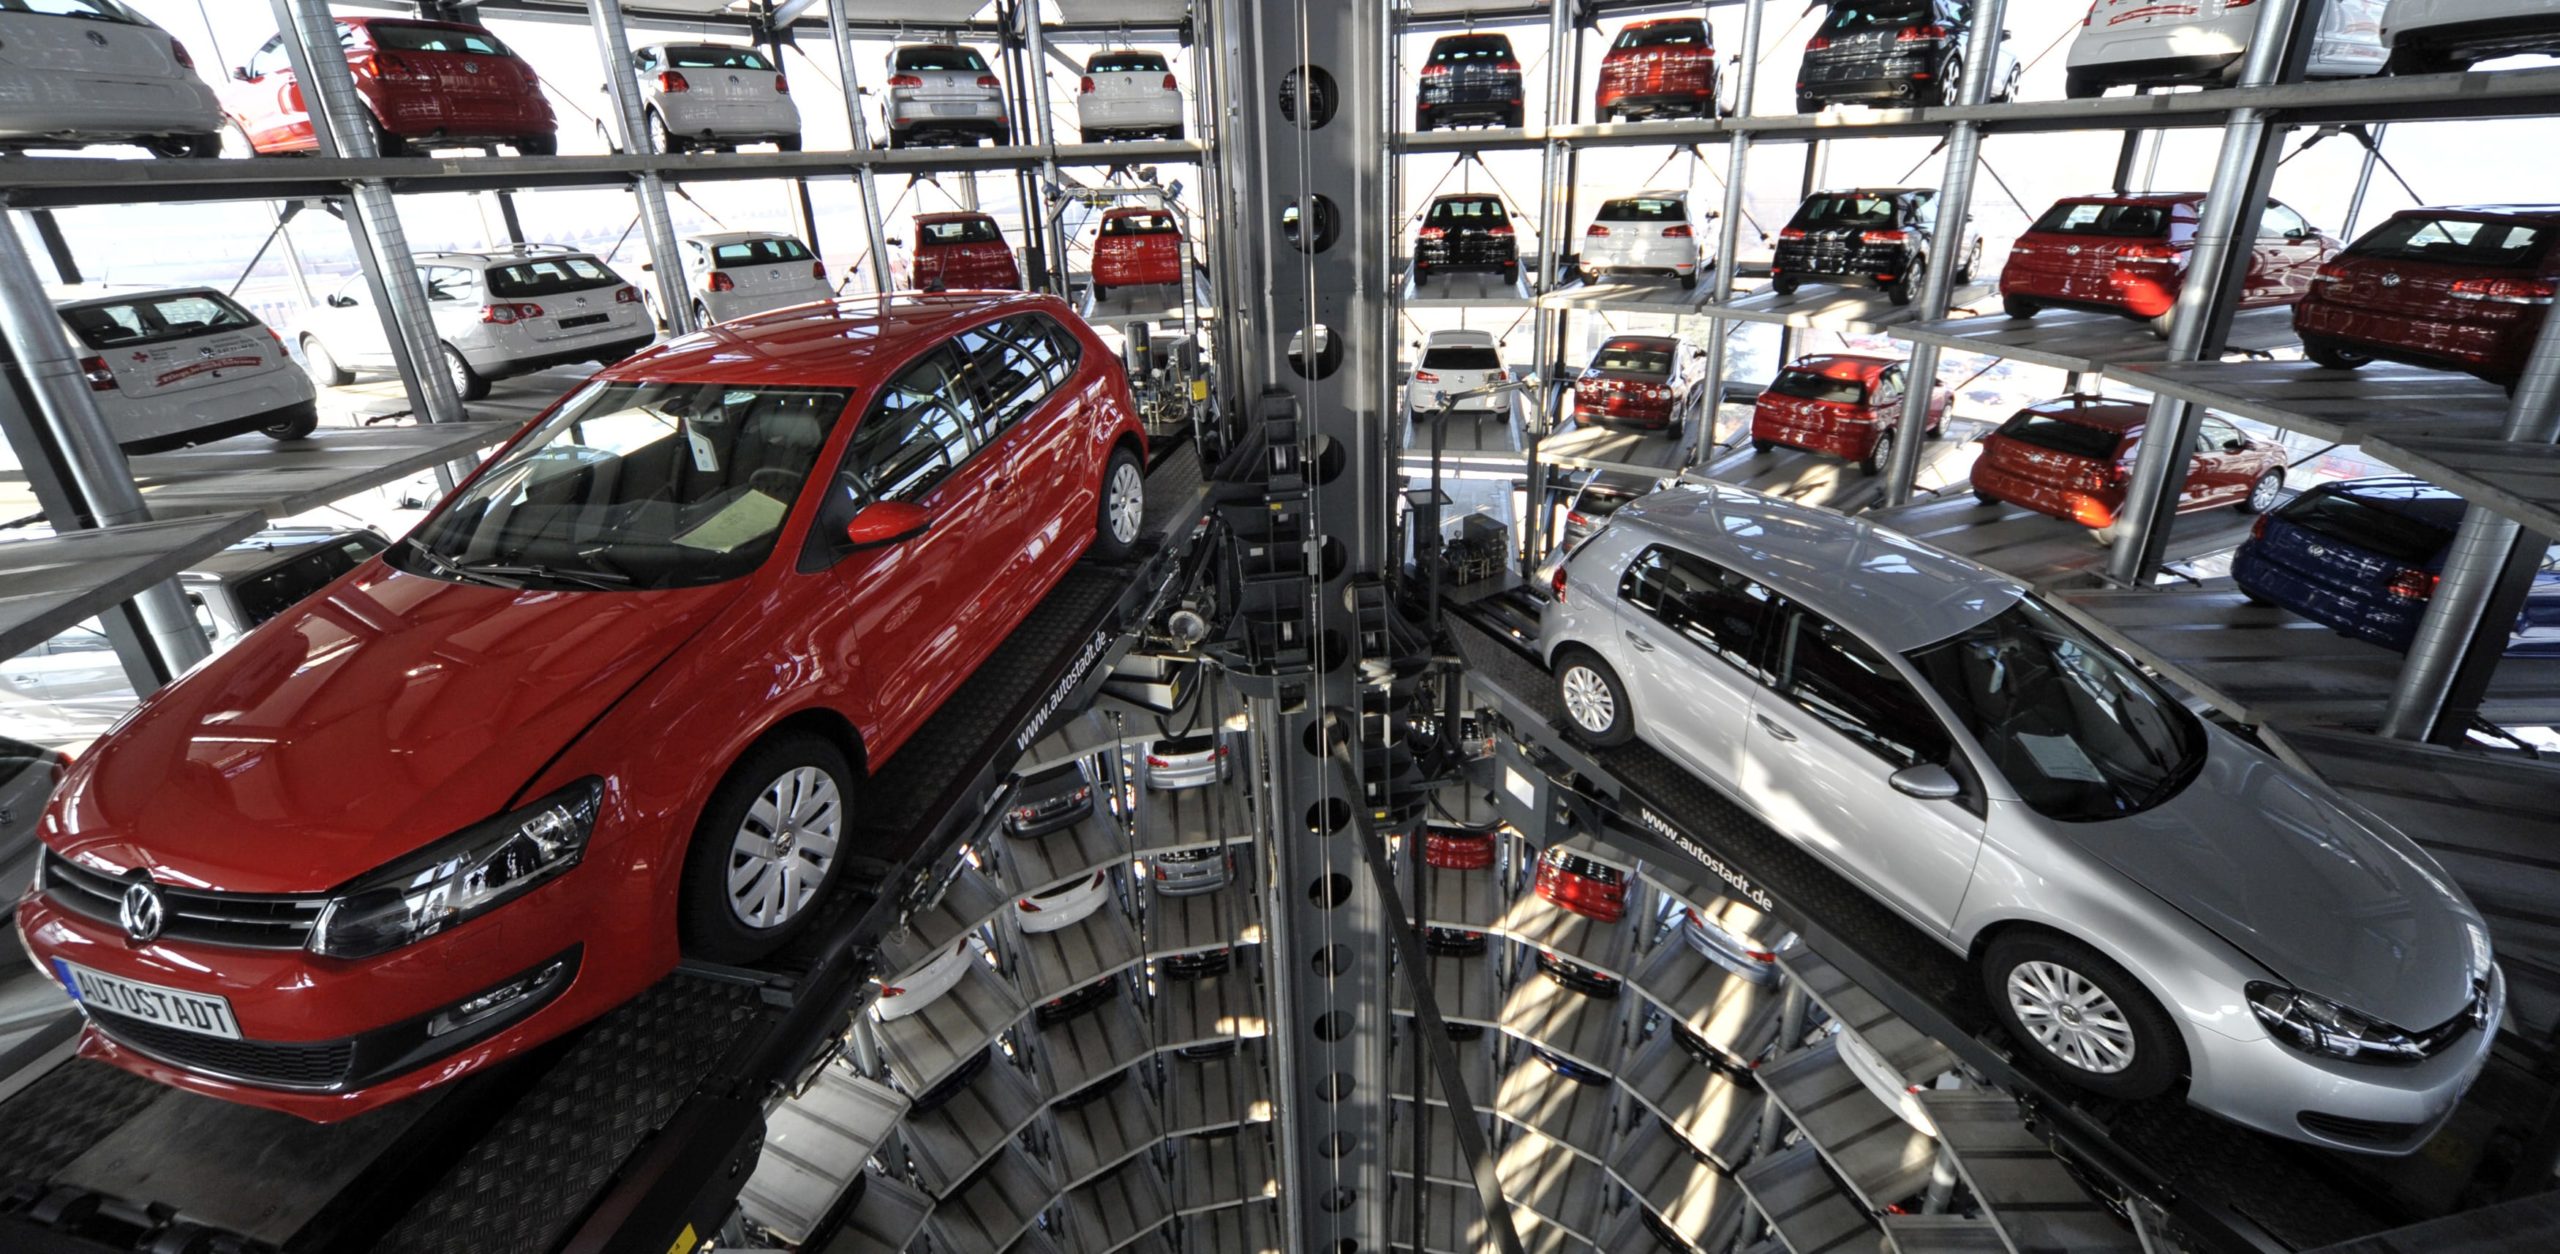 Germany’s automotive trade faces massive challenges after coronavirus